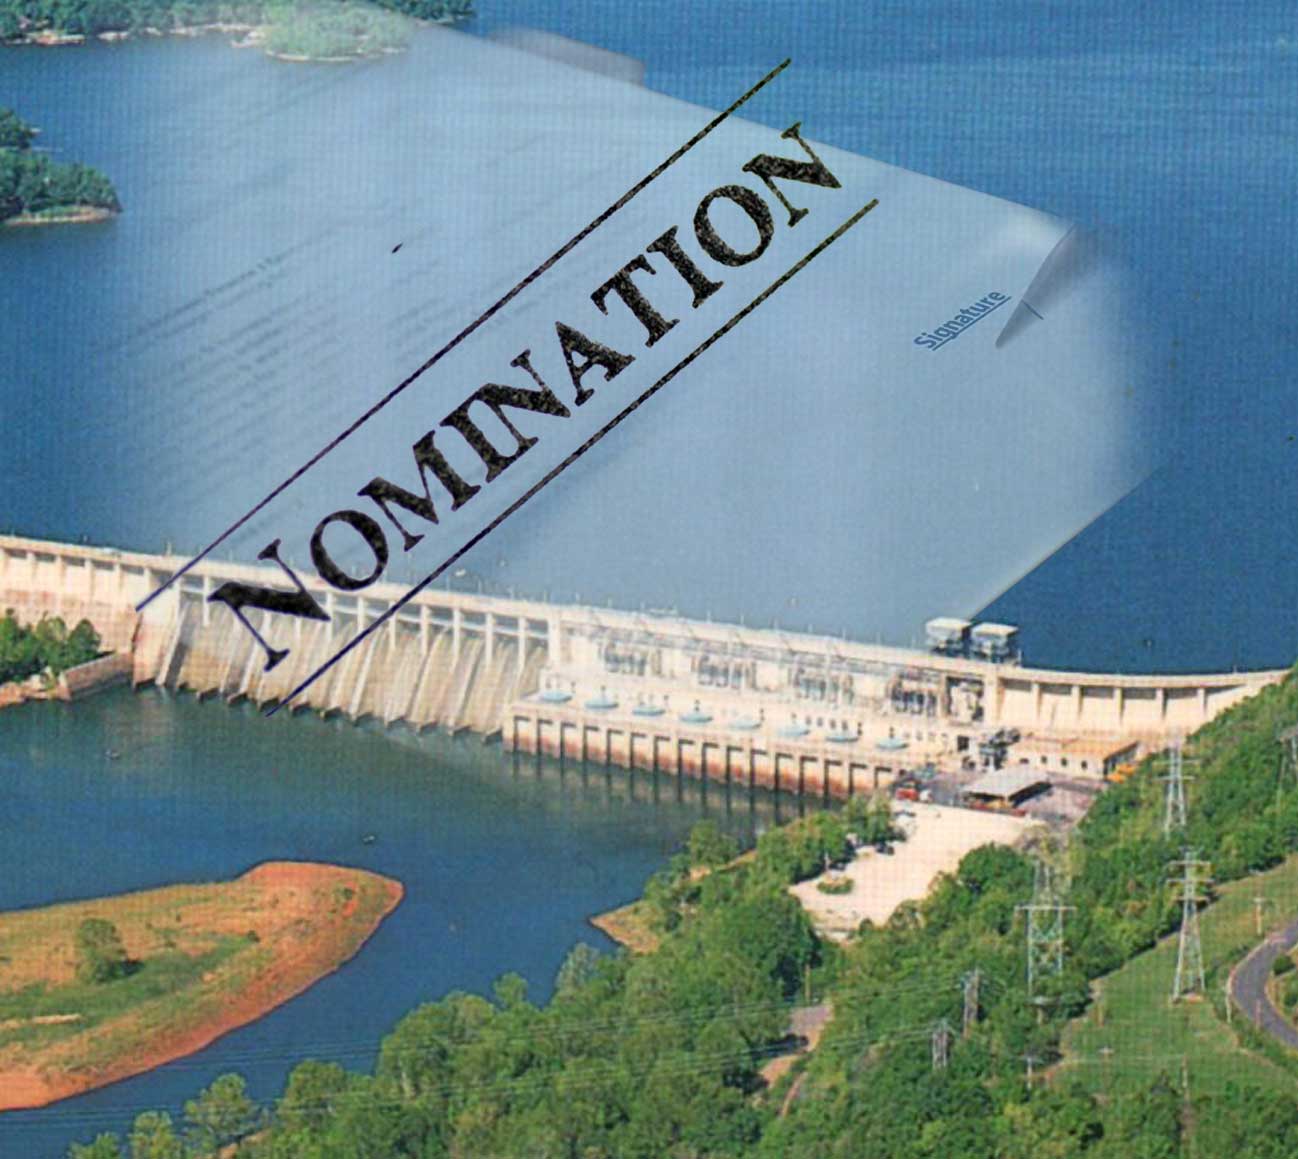 nrhp nominations dam image - NRHP nominations services carbondale illinois